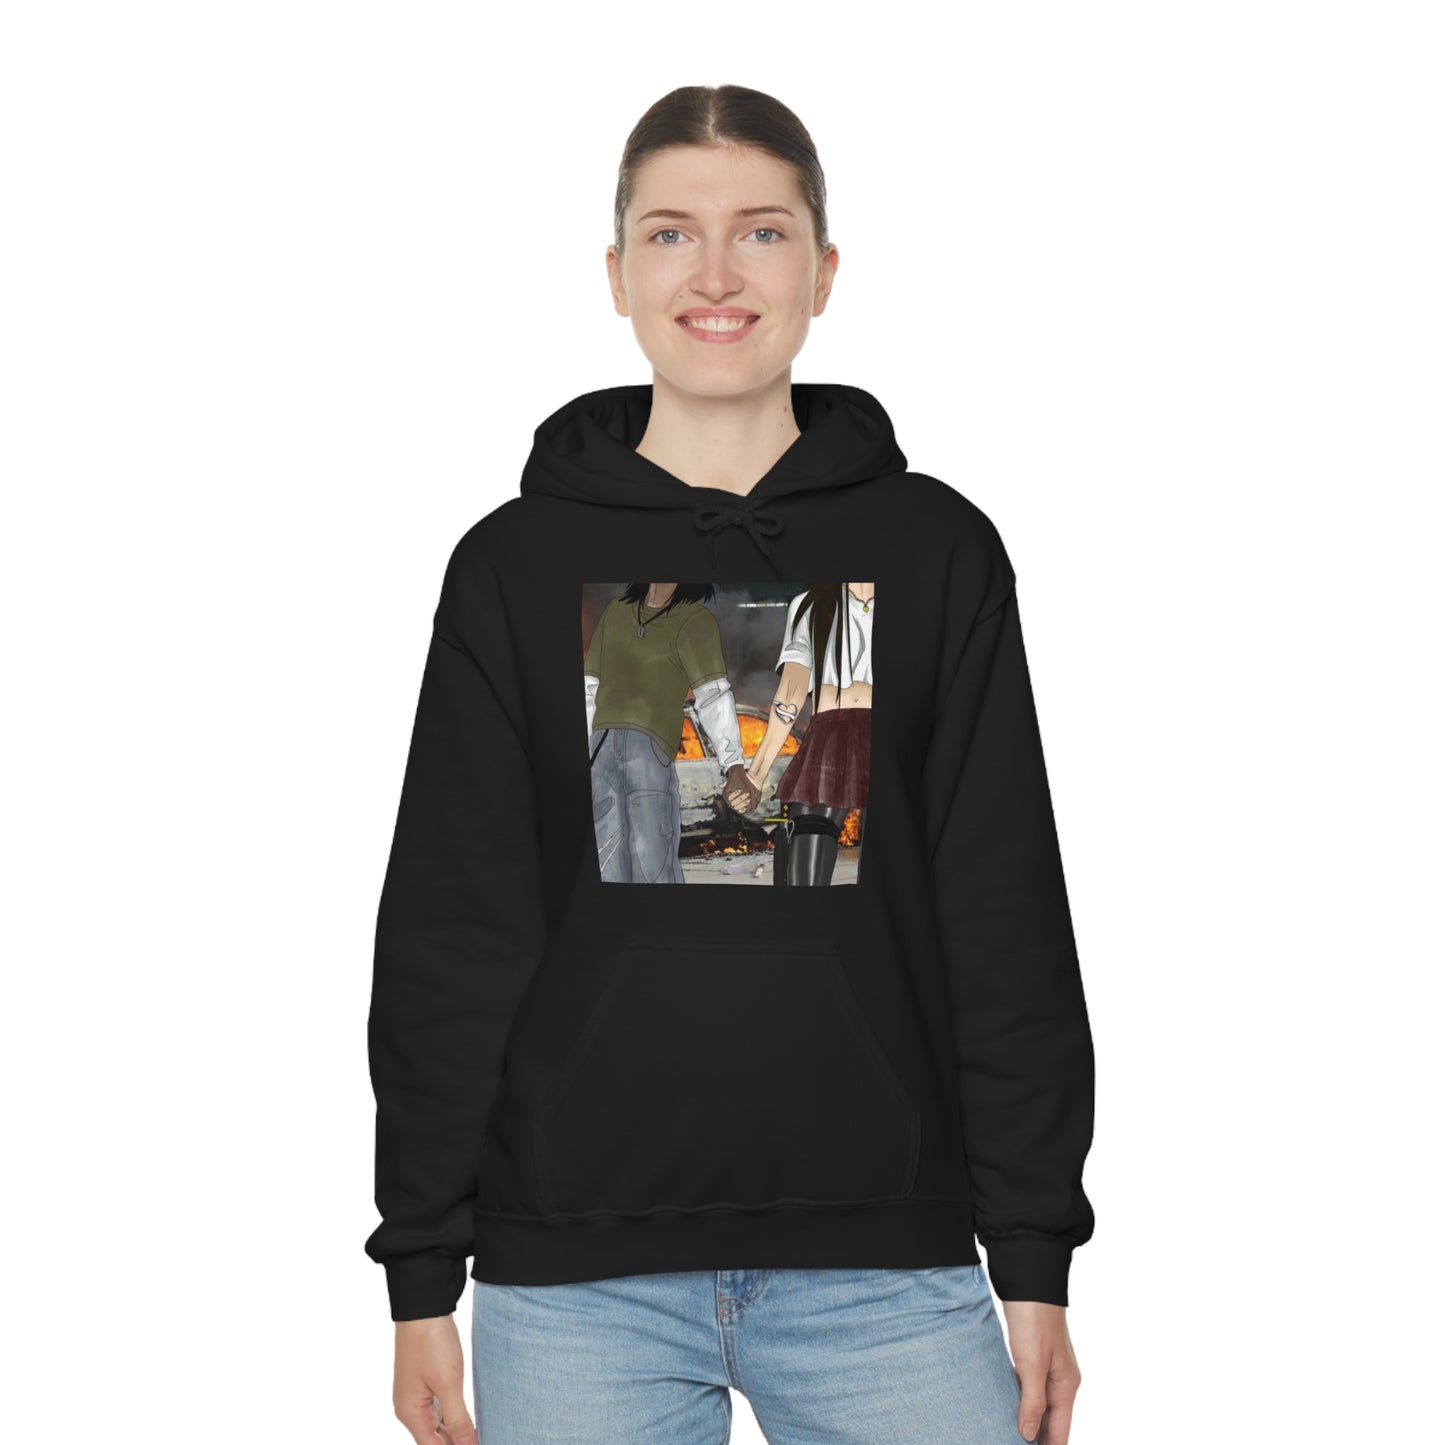 “Through hell and back” Hooded Sweatshirt